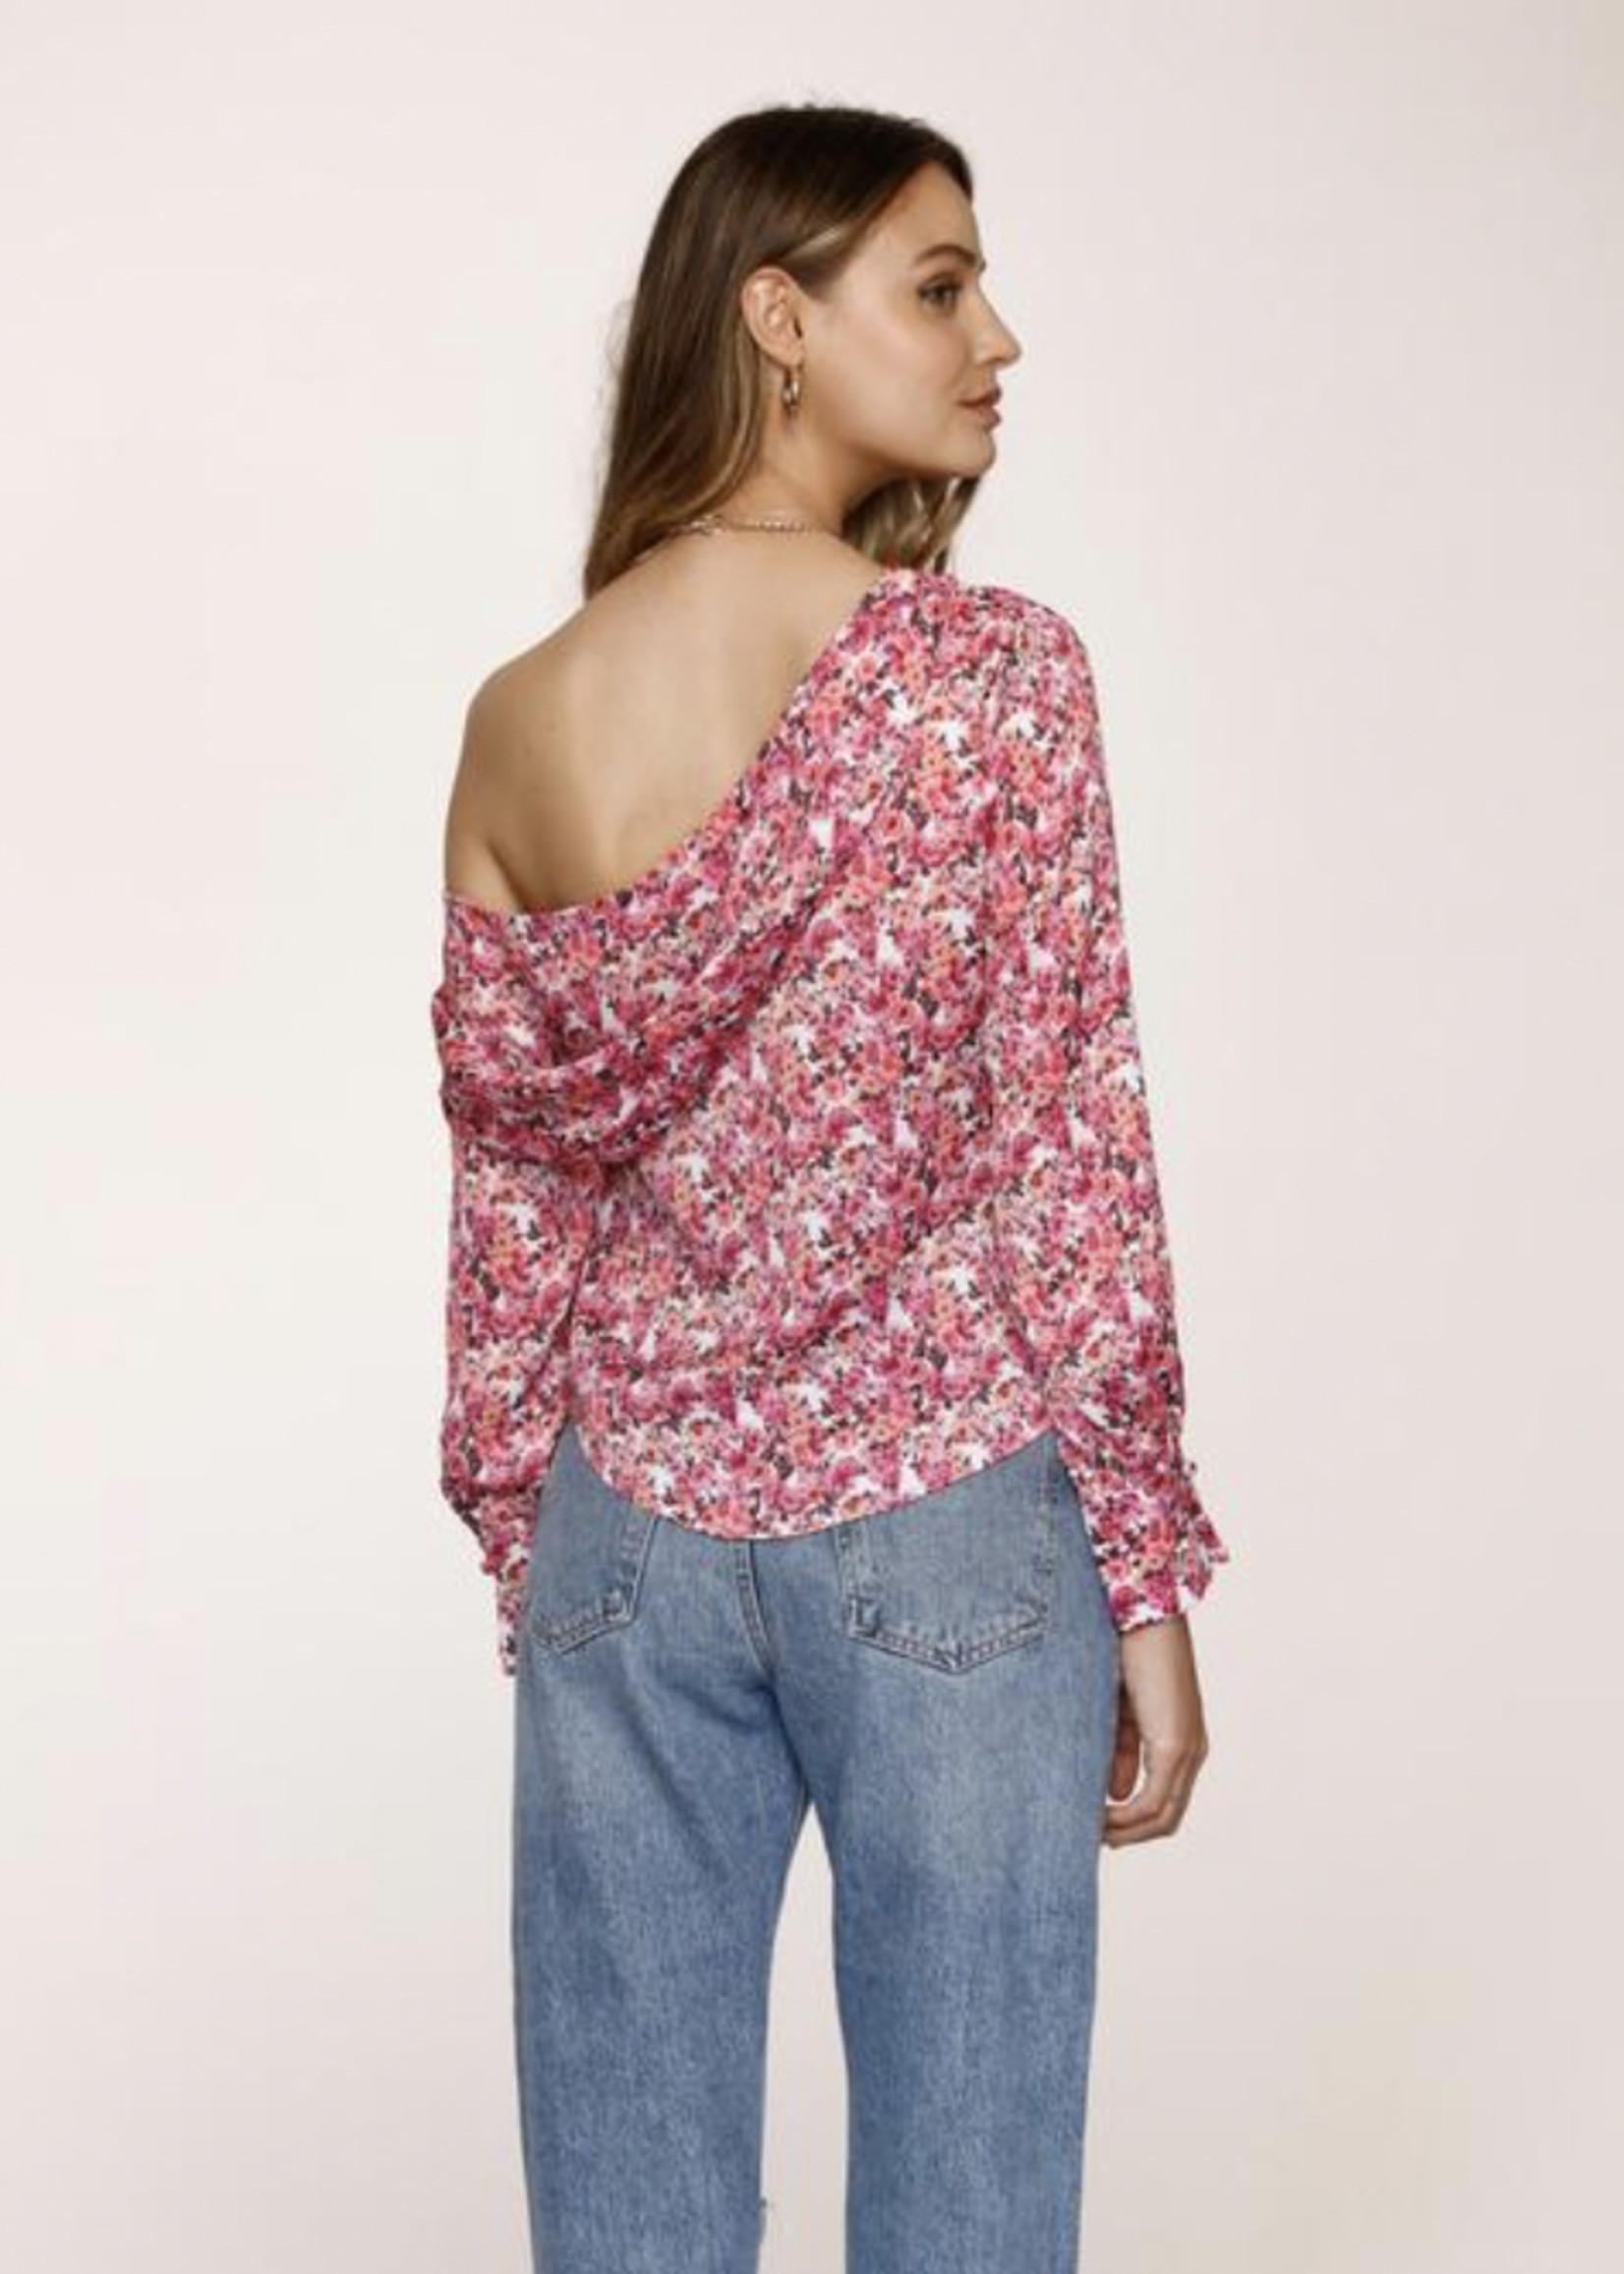 Heartloom Keely Blossom Top